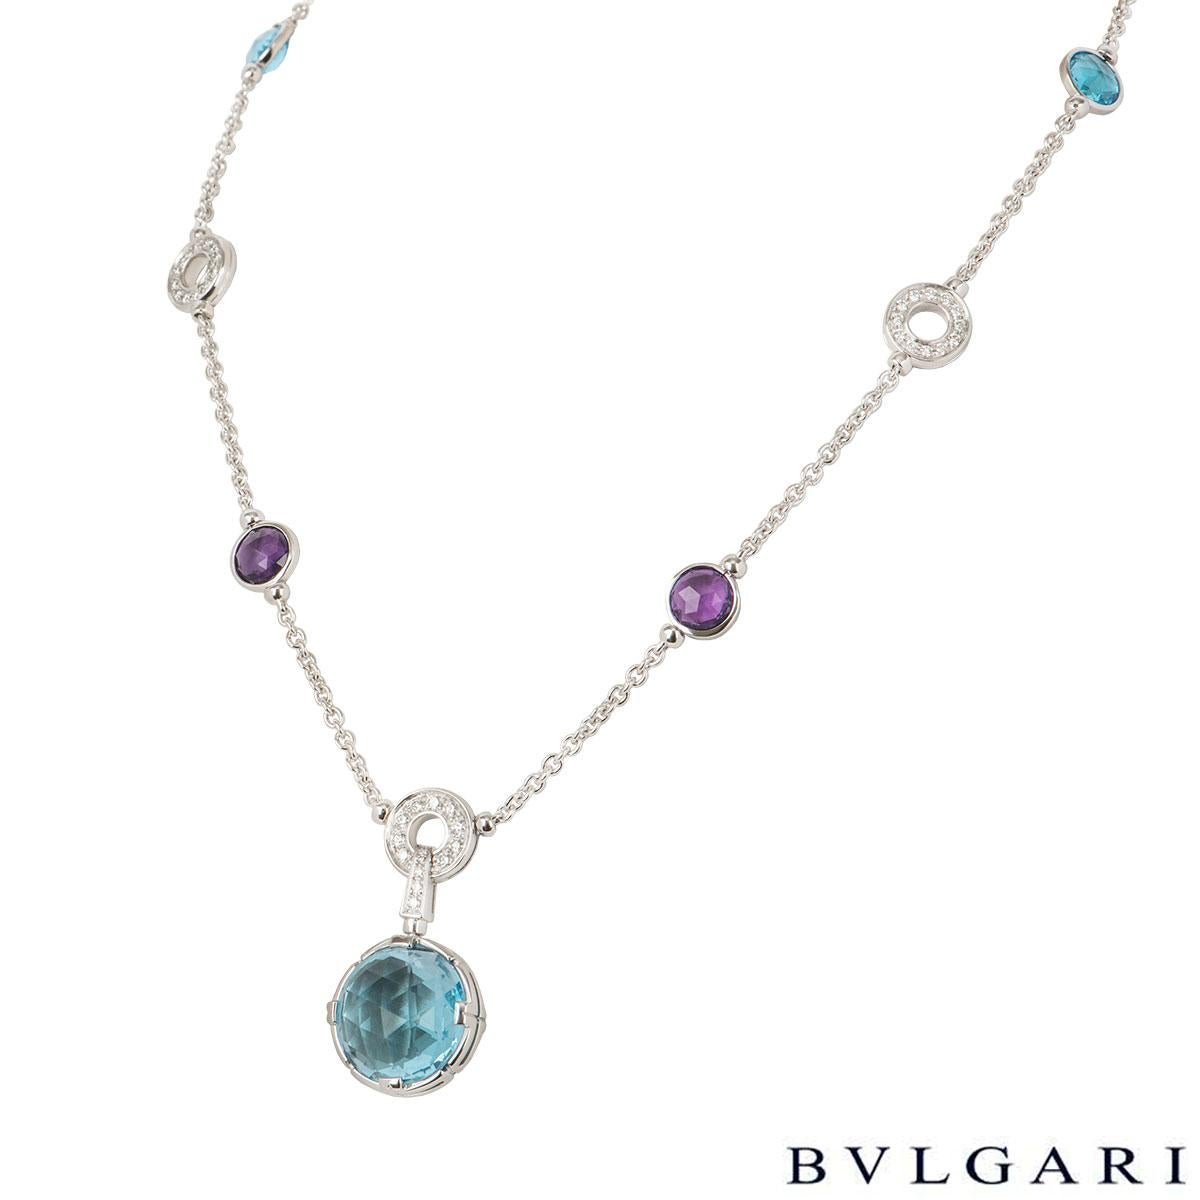 A stunning 18k white gold diamond and multi-gem necklace by Bvlgari from the Parentesi collection. The necklace comprises of the round 3 amethyst, 2 topaz spaced out on the necklace with 2 'Bvlgari Bvlgari' hoops, 3 circular hoops pave set with